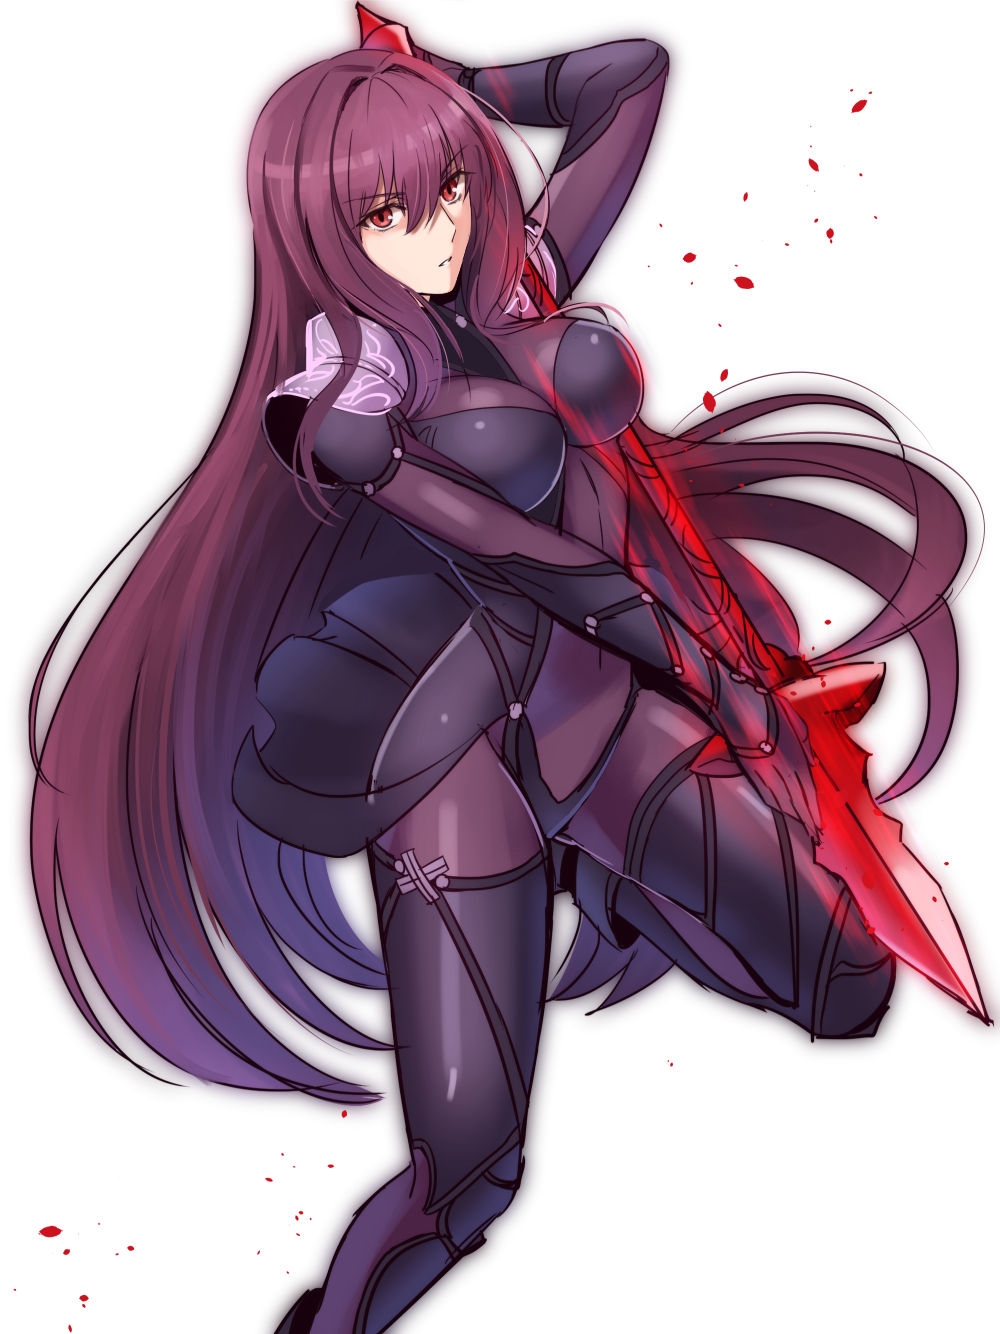 Scathach Fate/Grand Order 50